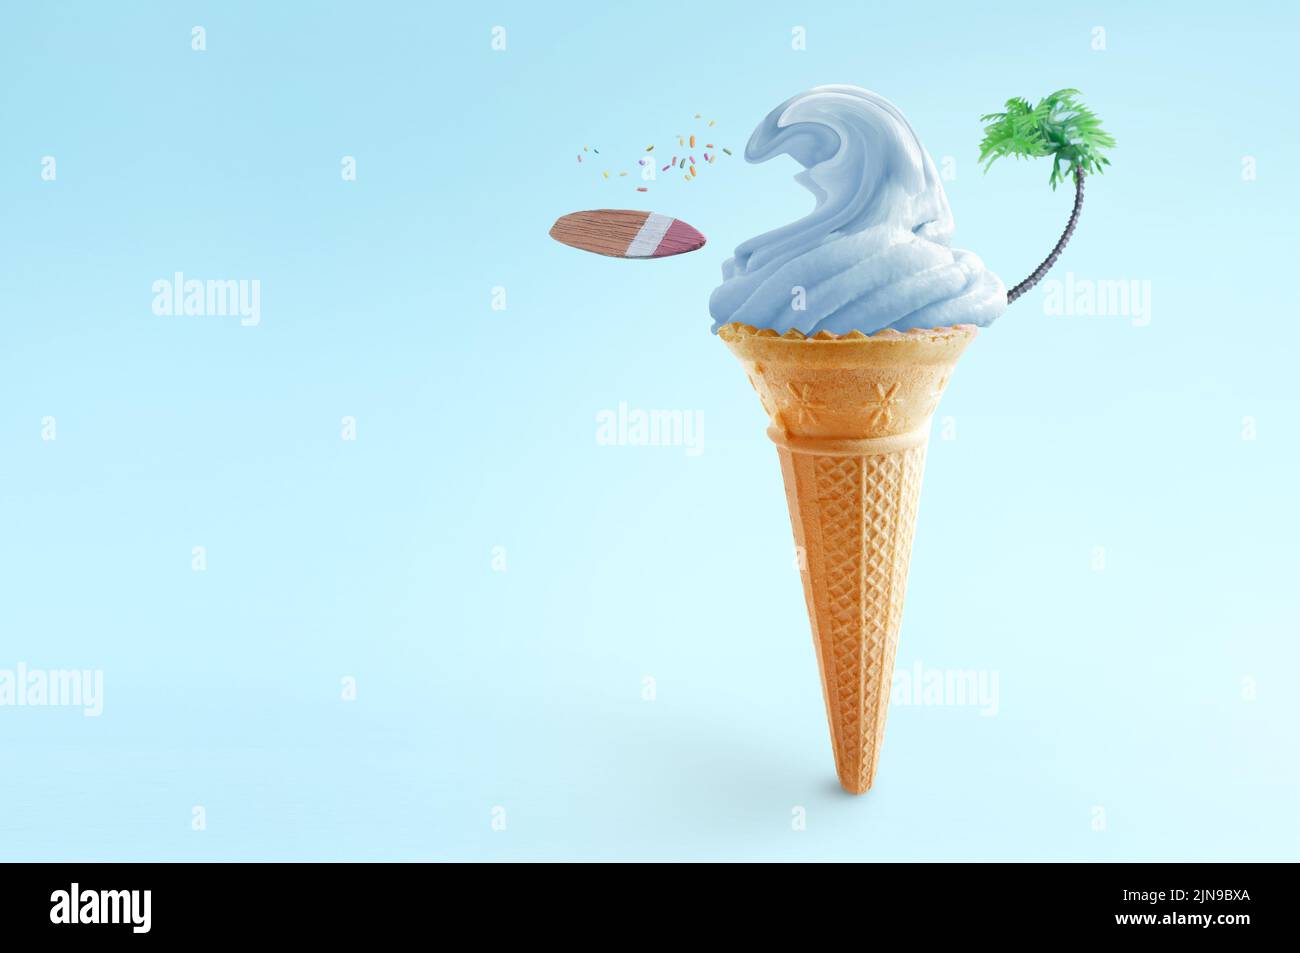 Strawberry ice cream wave with surfboard, beach sign and palm tree Stock Photo